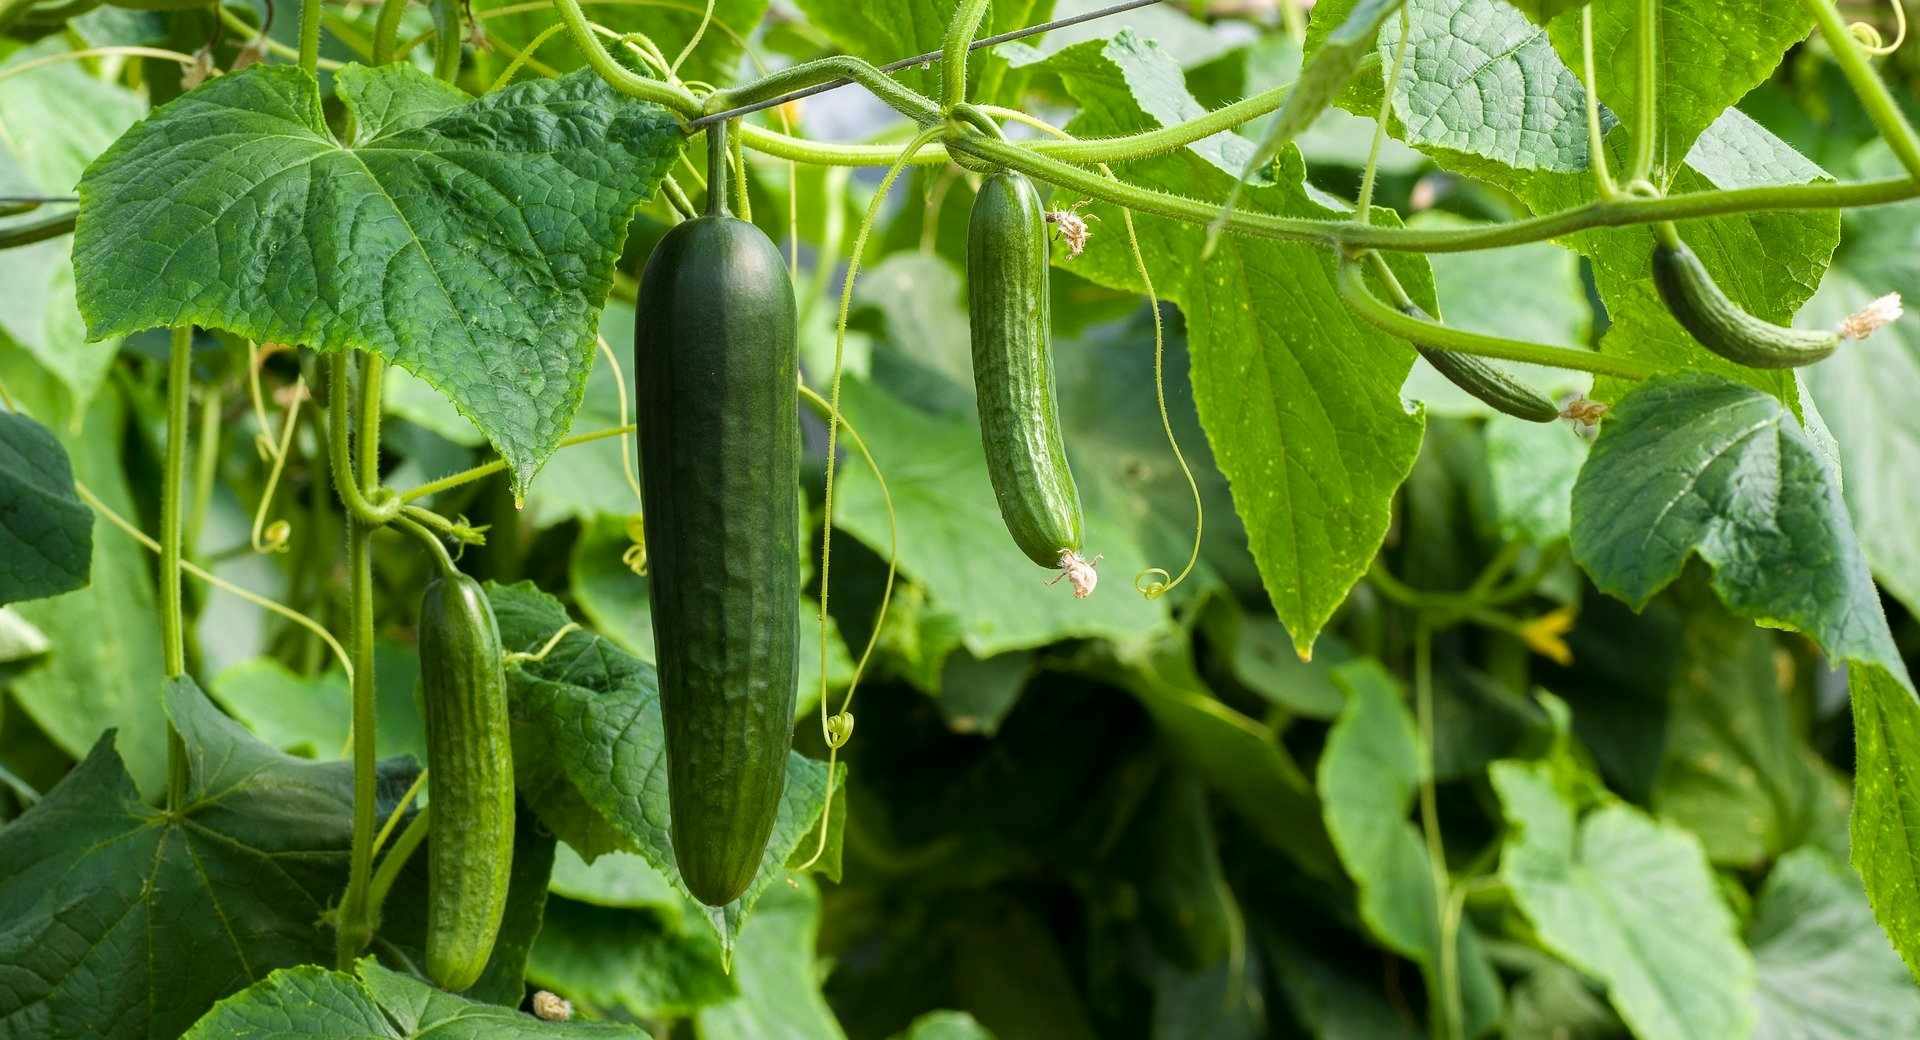 A cucumber, the snake looking fruits that often scare cats. But can cats eat cucumber? 